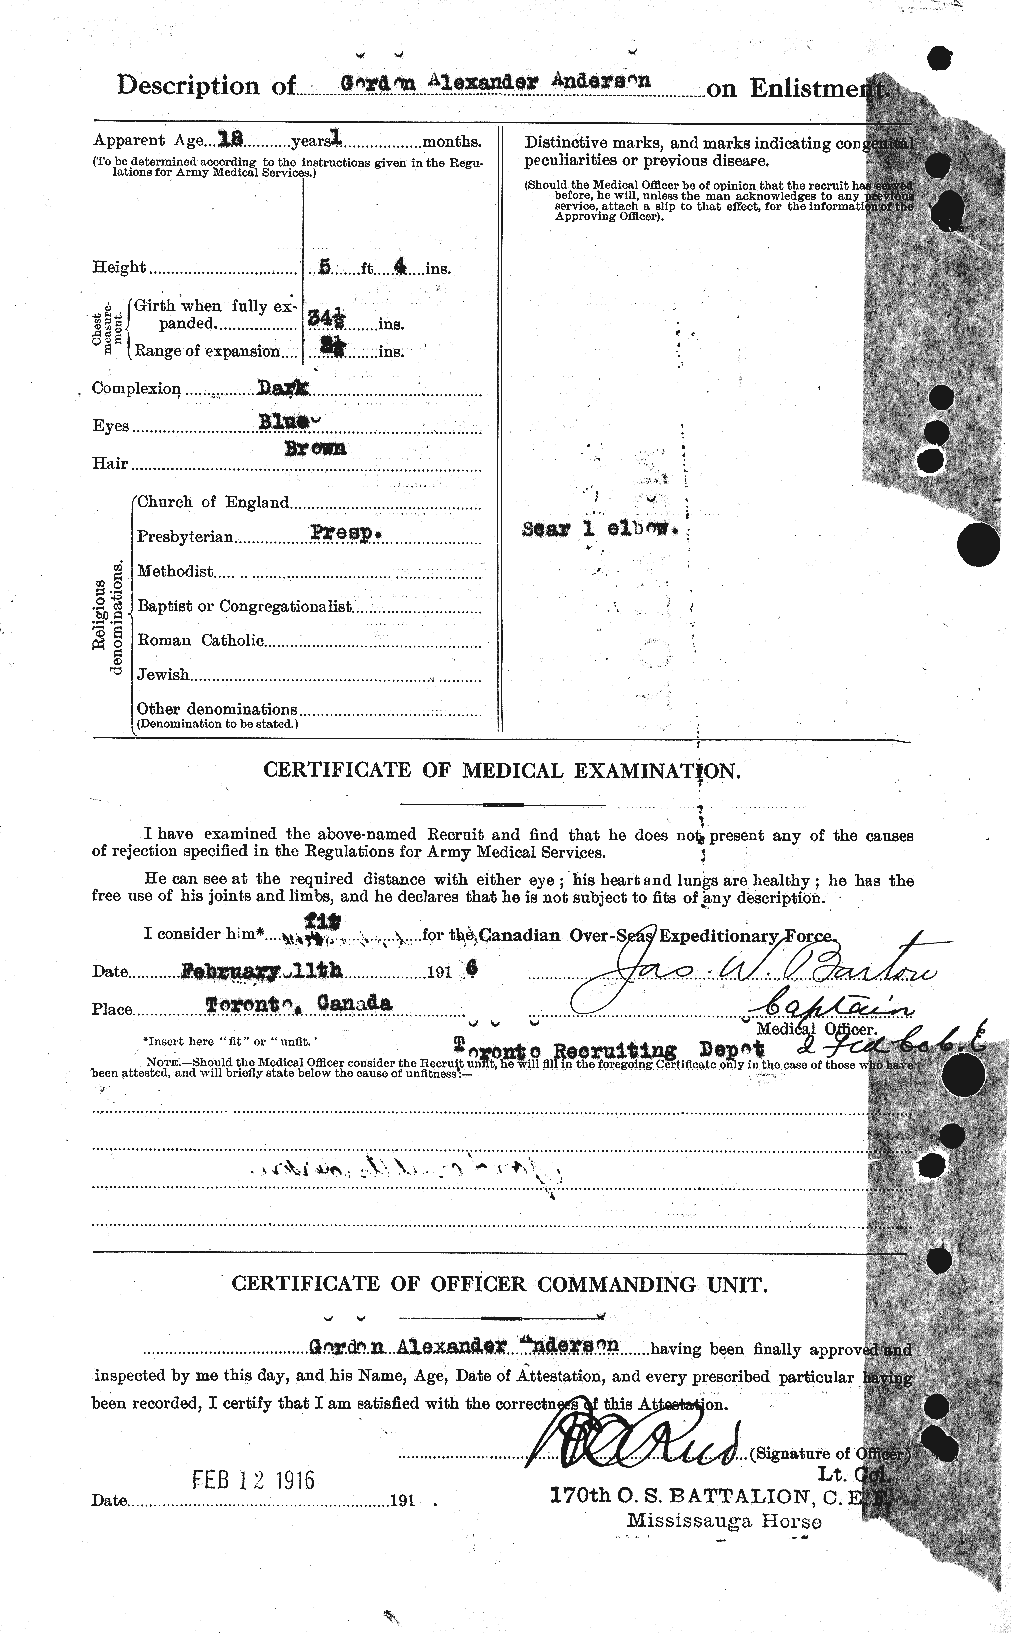 Personnel Records of the First World War - CEF 209667b